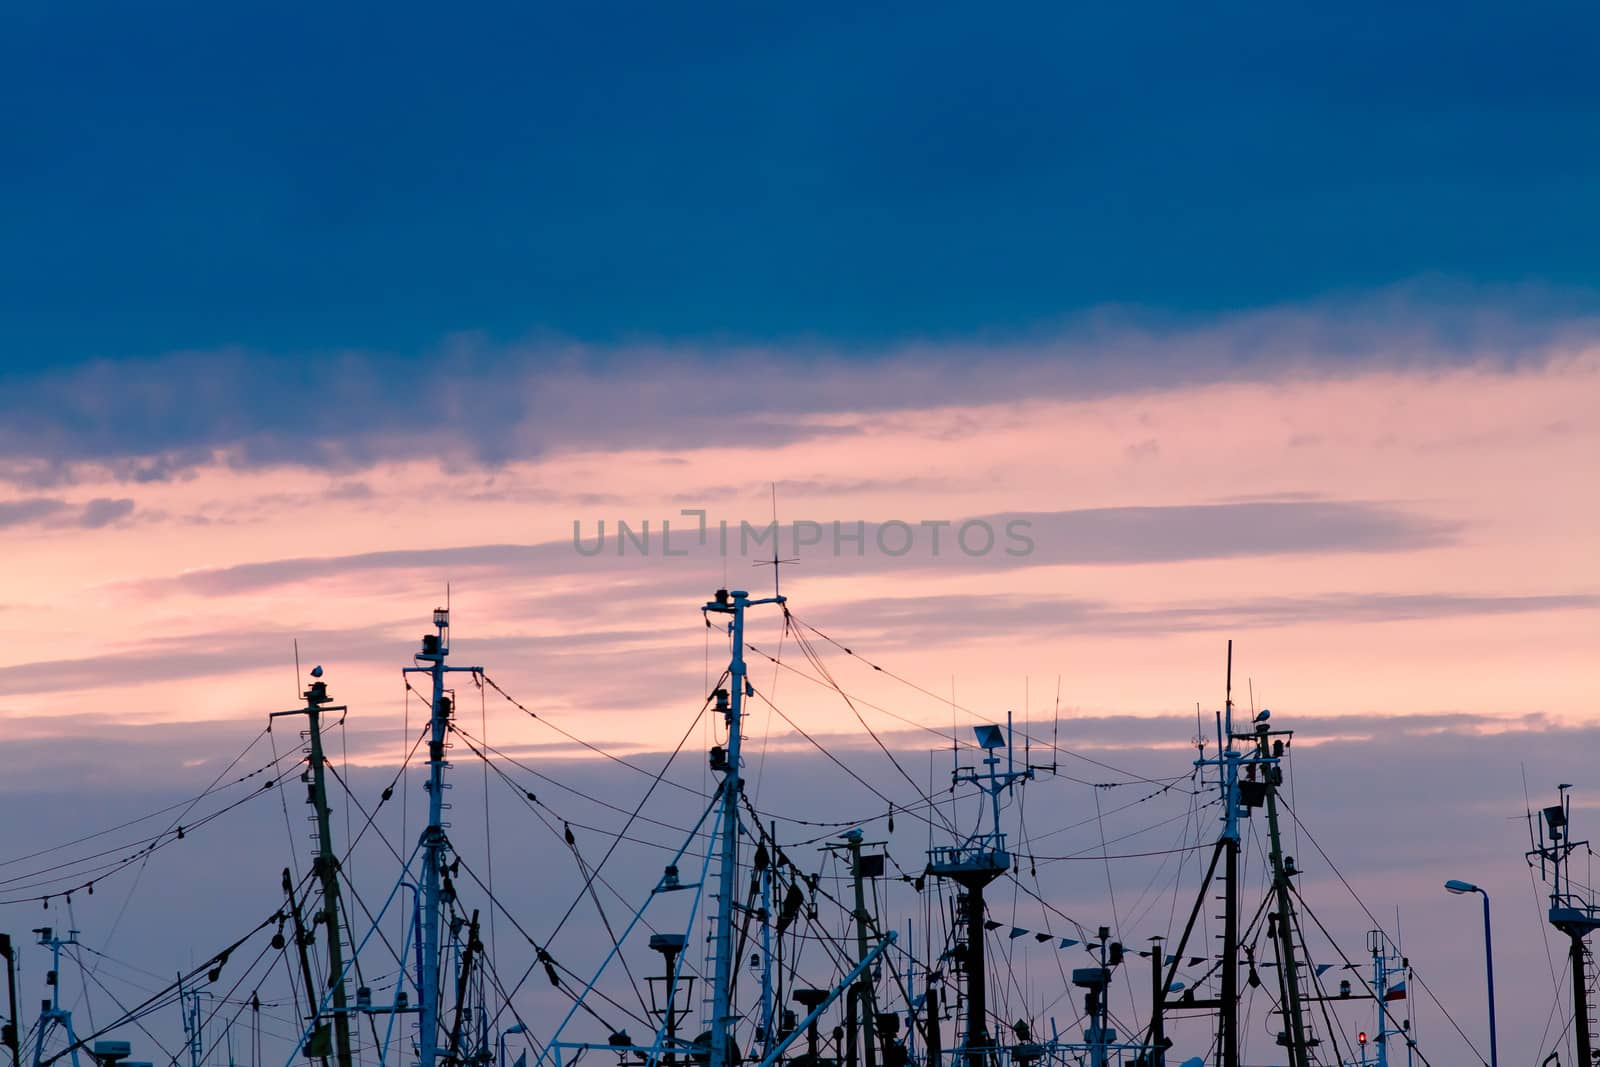 Plenty of masts of fishing boats and sailing boats in sunset background, visible ropes, rigging, radars and navigation aerials, space fot text.